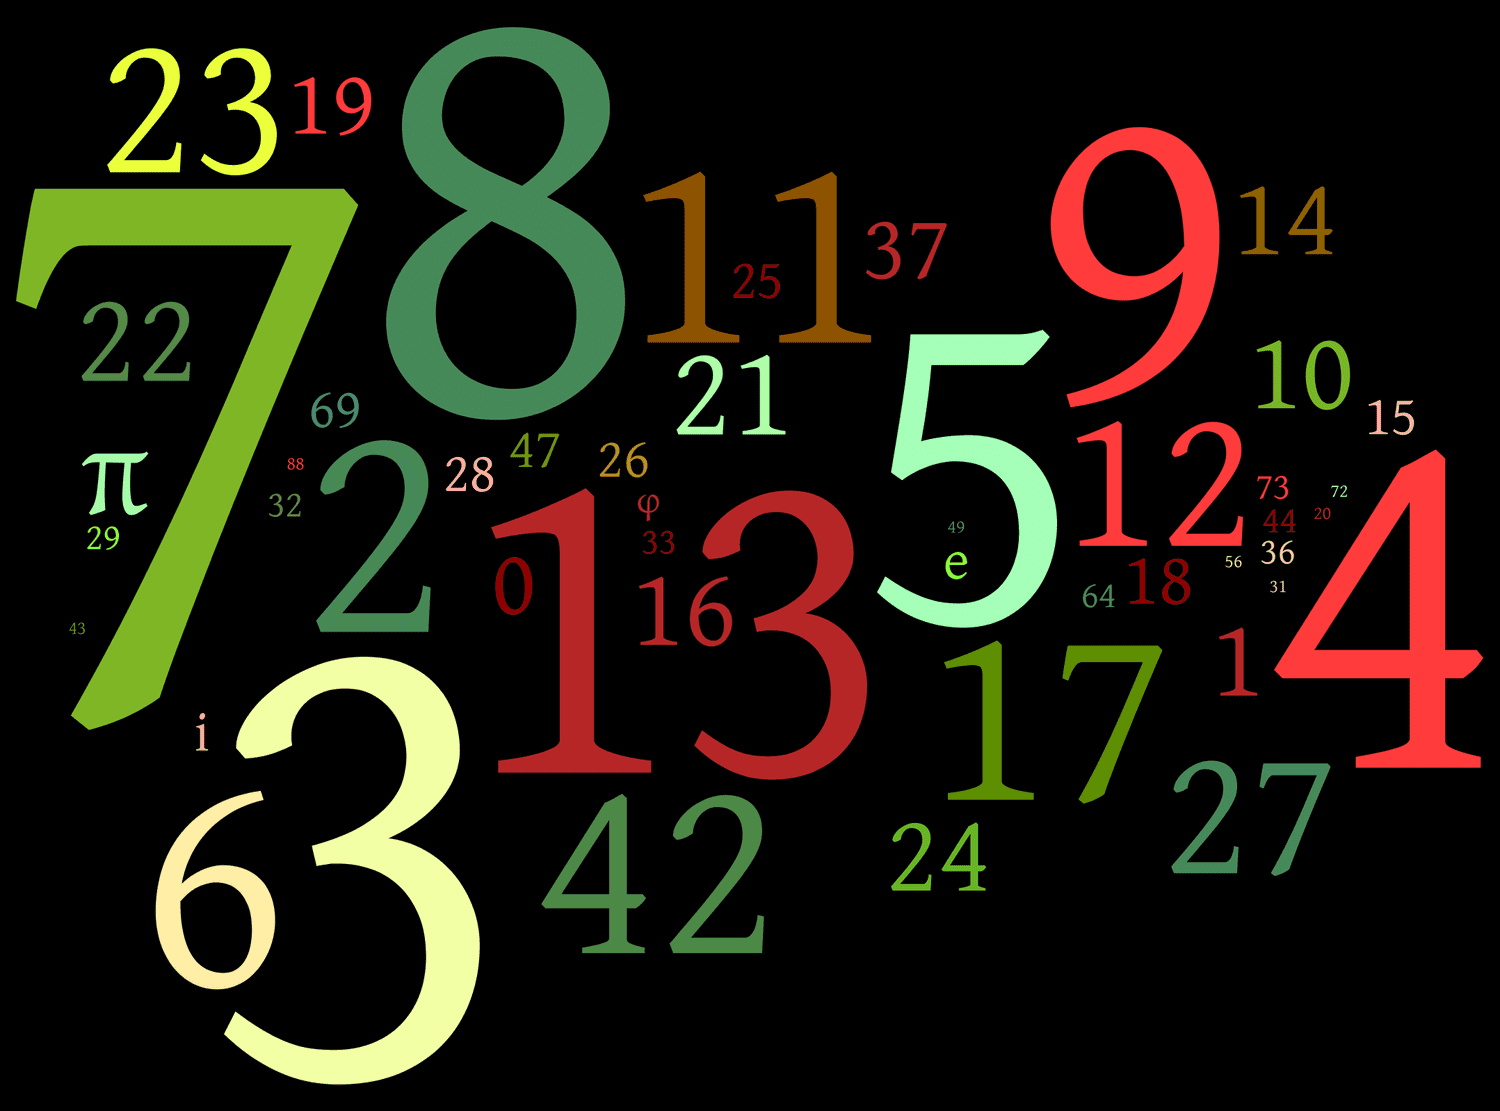 English numbers spelling